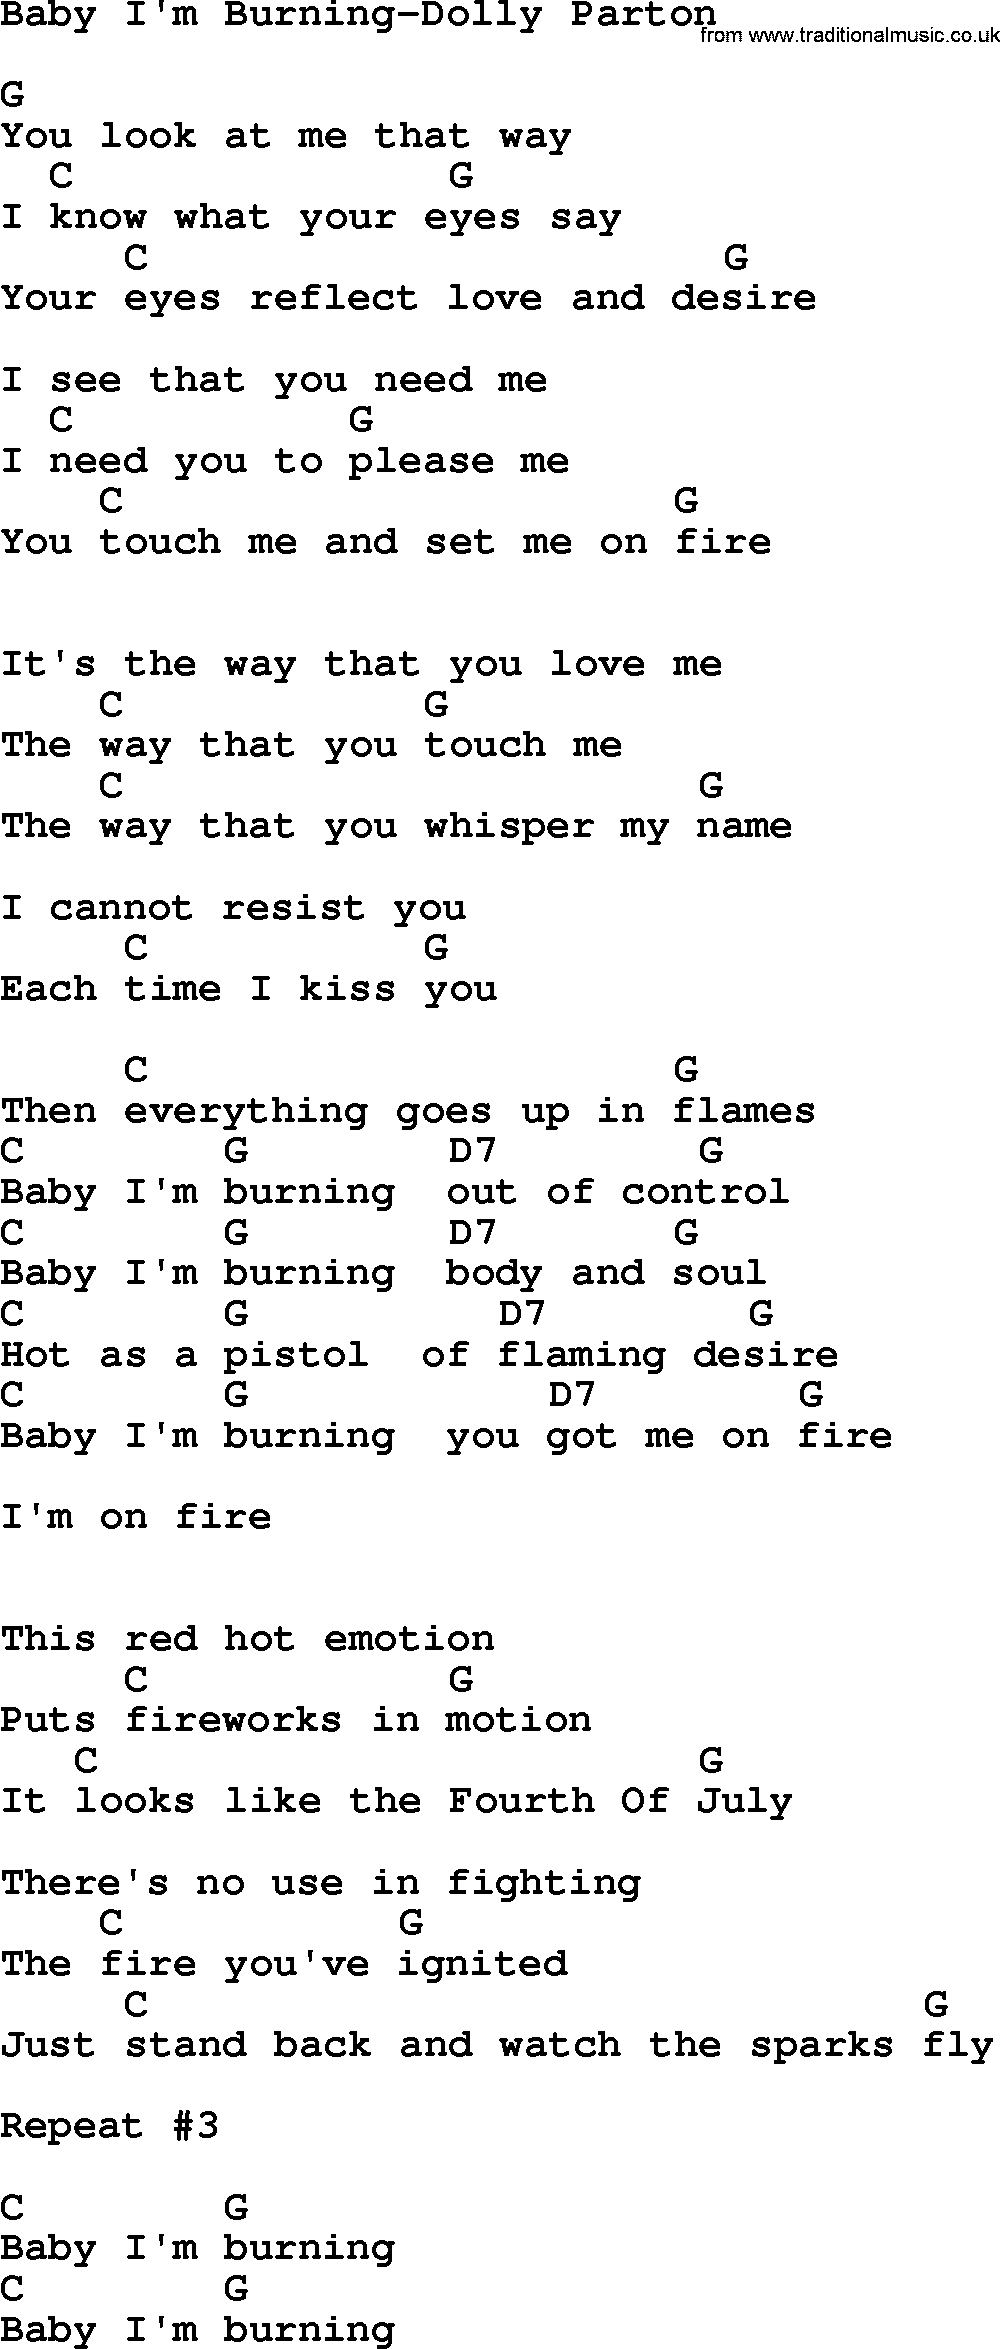 Country music song: Baby I'm Burning-Dolly Parton lyrics and chords